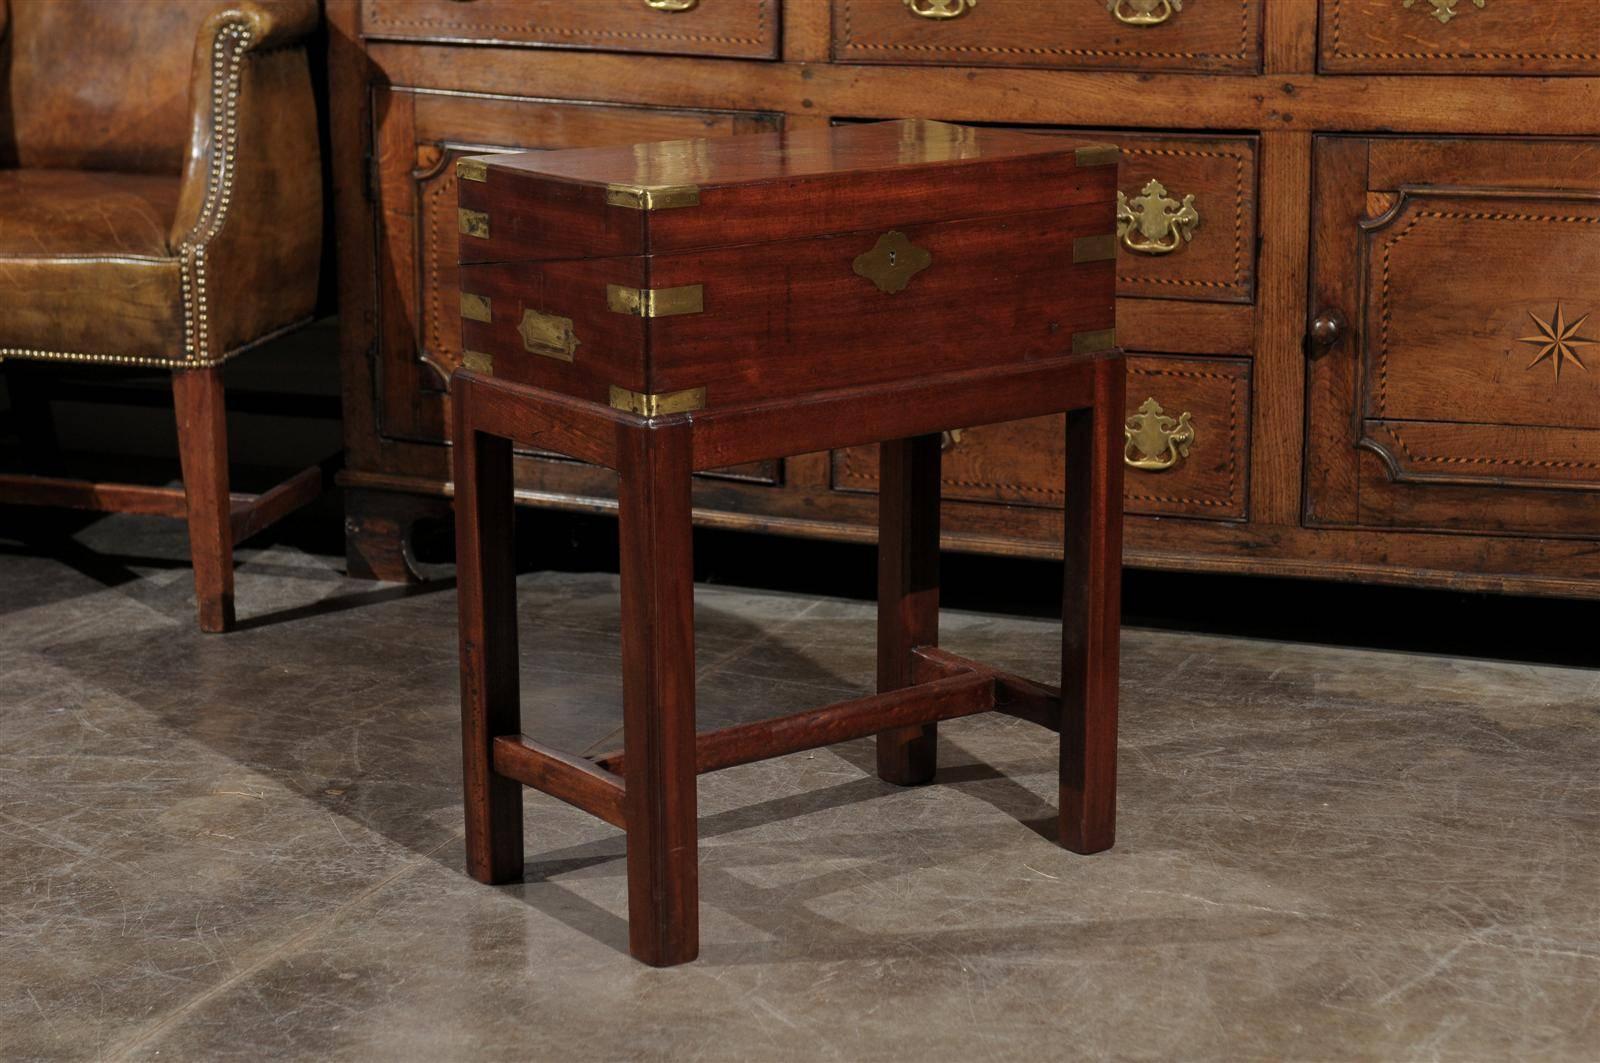 A mahogany English writing box on a four legged stand. This wonderful box on custom stand opens to reveal a slanted small size lap desk fitted with a leather surface for writing. Below the leather writing surface is an enclosed storage area of